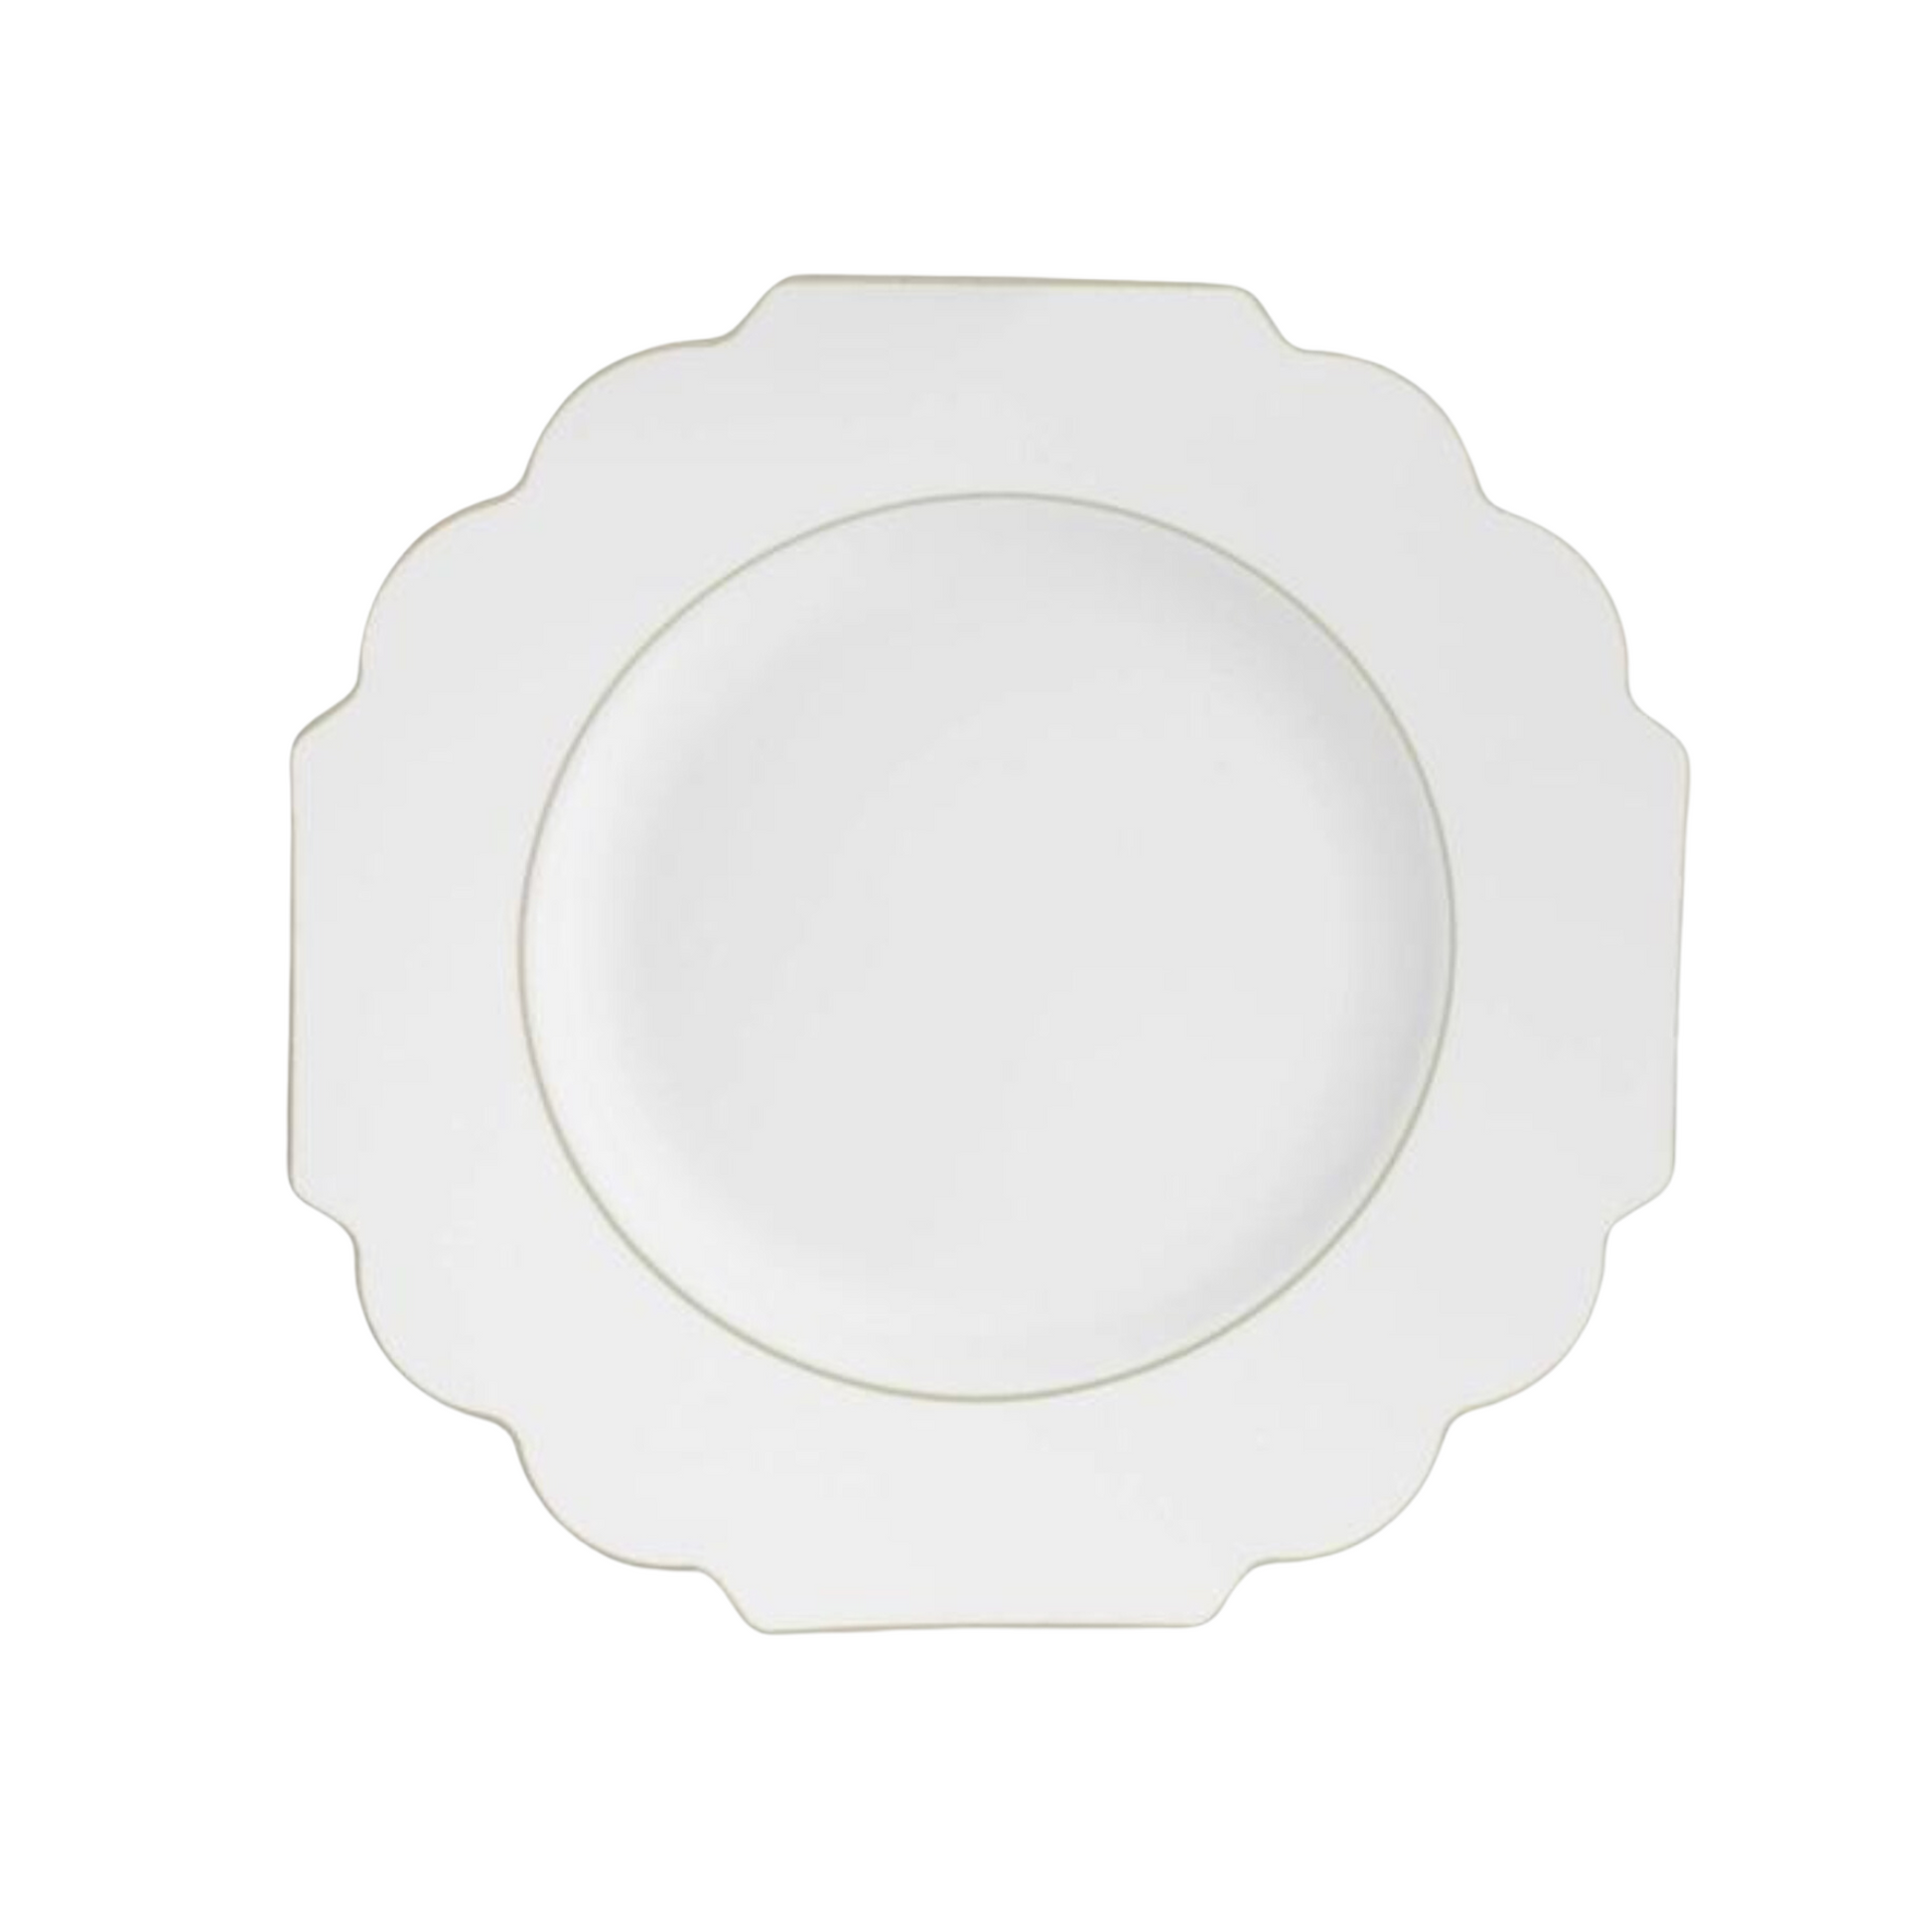 plastic white dinner plate with scalloped gold edge